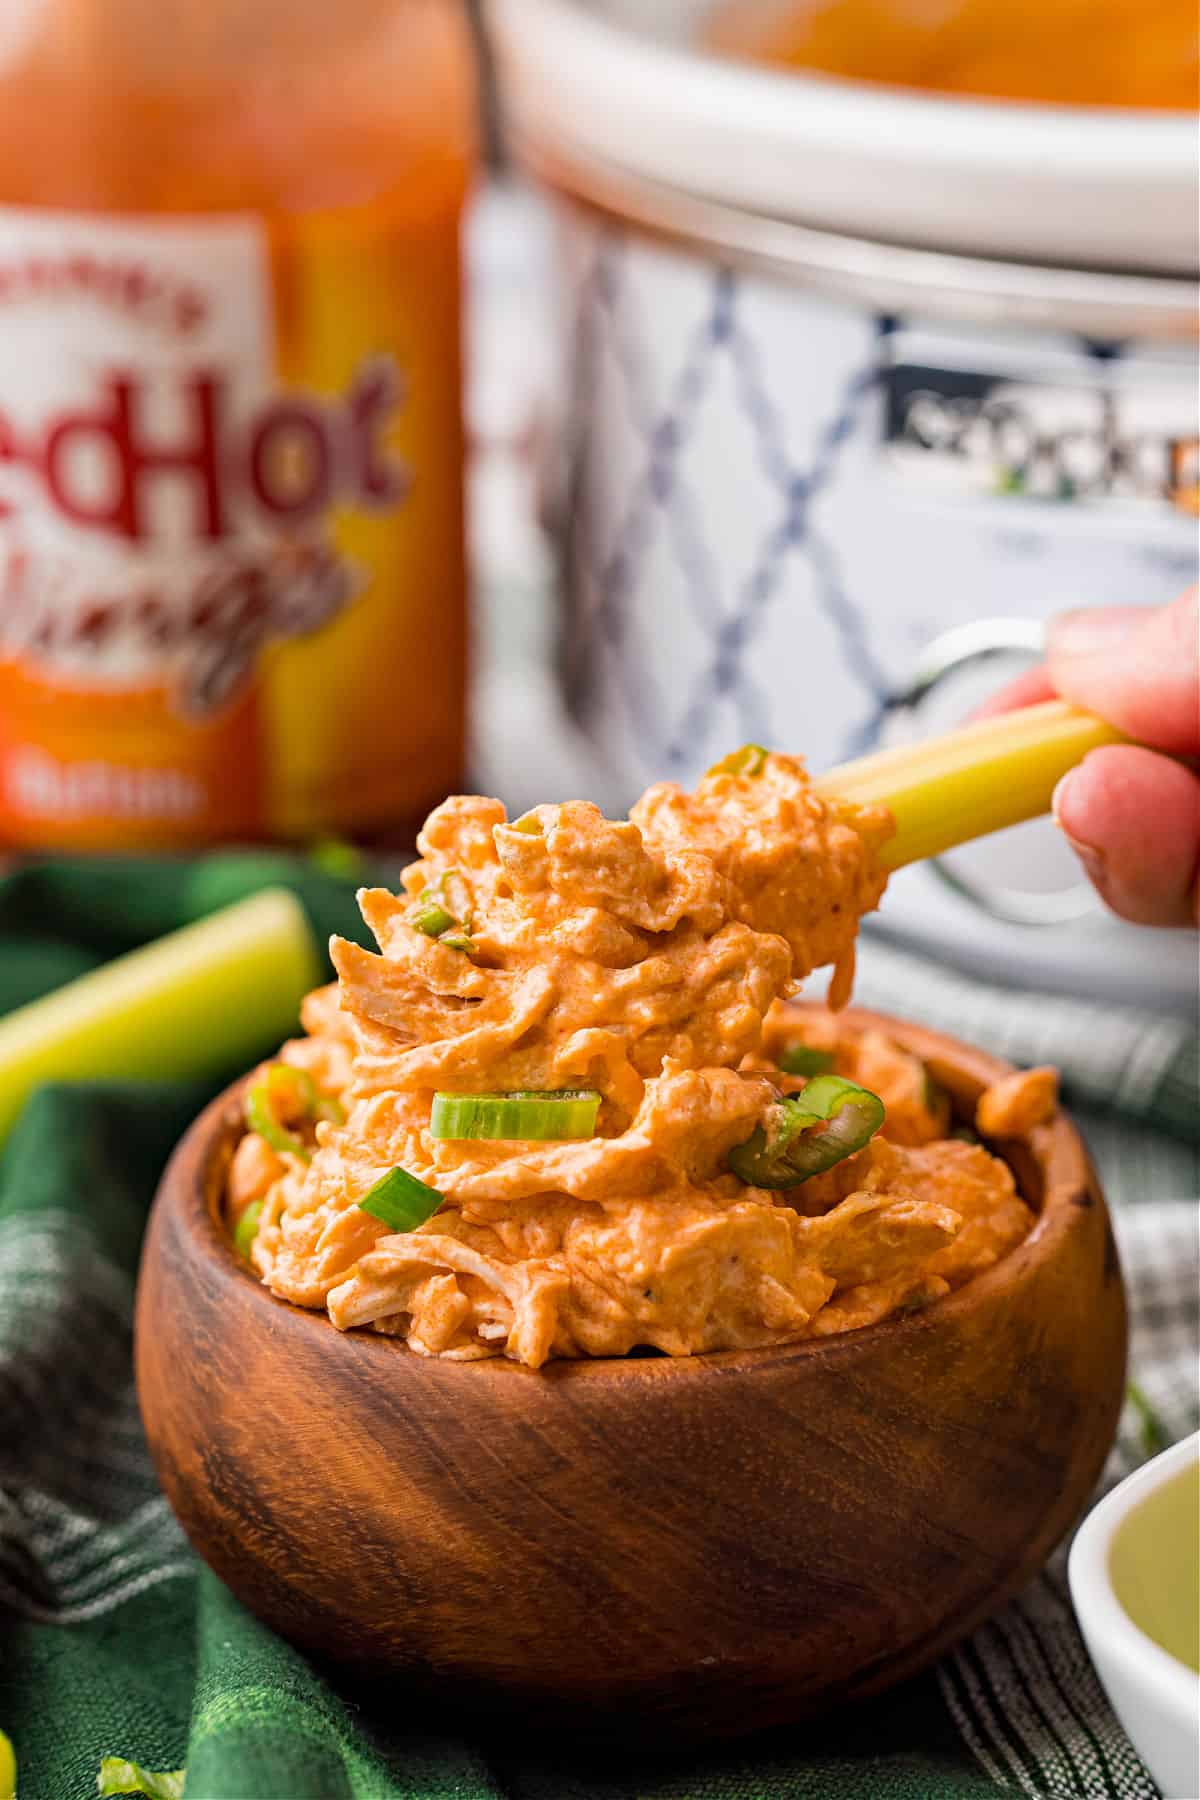 Buffalo chicken dip in a wooden bowl with a celery stick dipper.